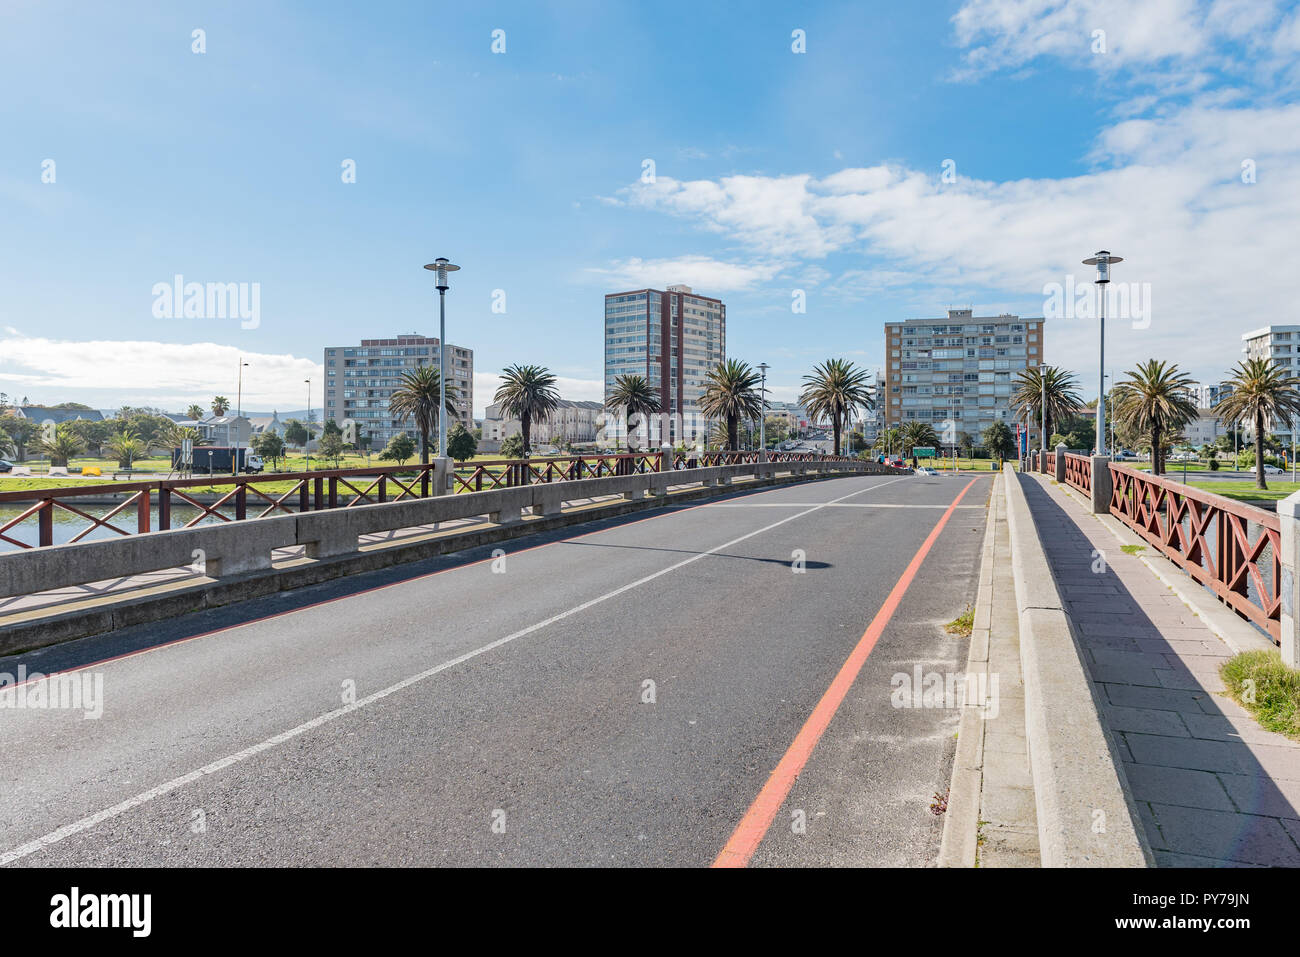 CAPE TOWN, SOUTH AFRICA, AUGUST 14, 2018: Bridge over the Diep River in Milnerton. Apartment buildings are visible Stock Photo